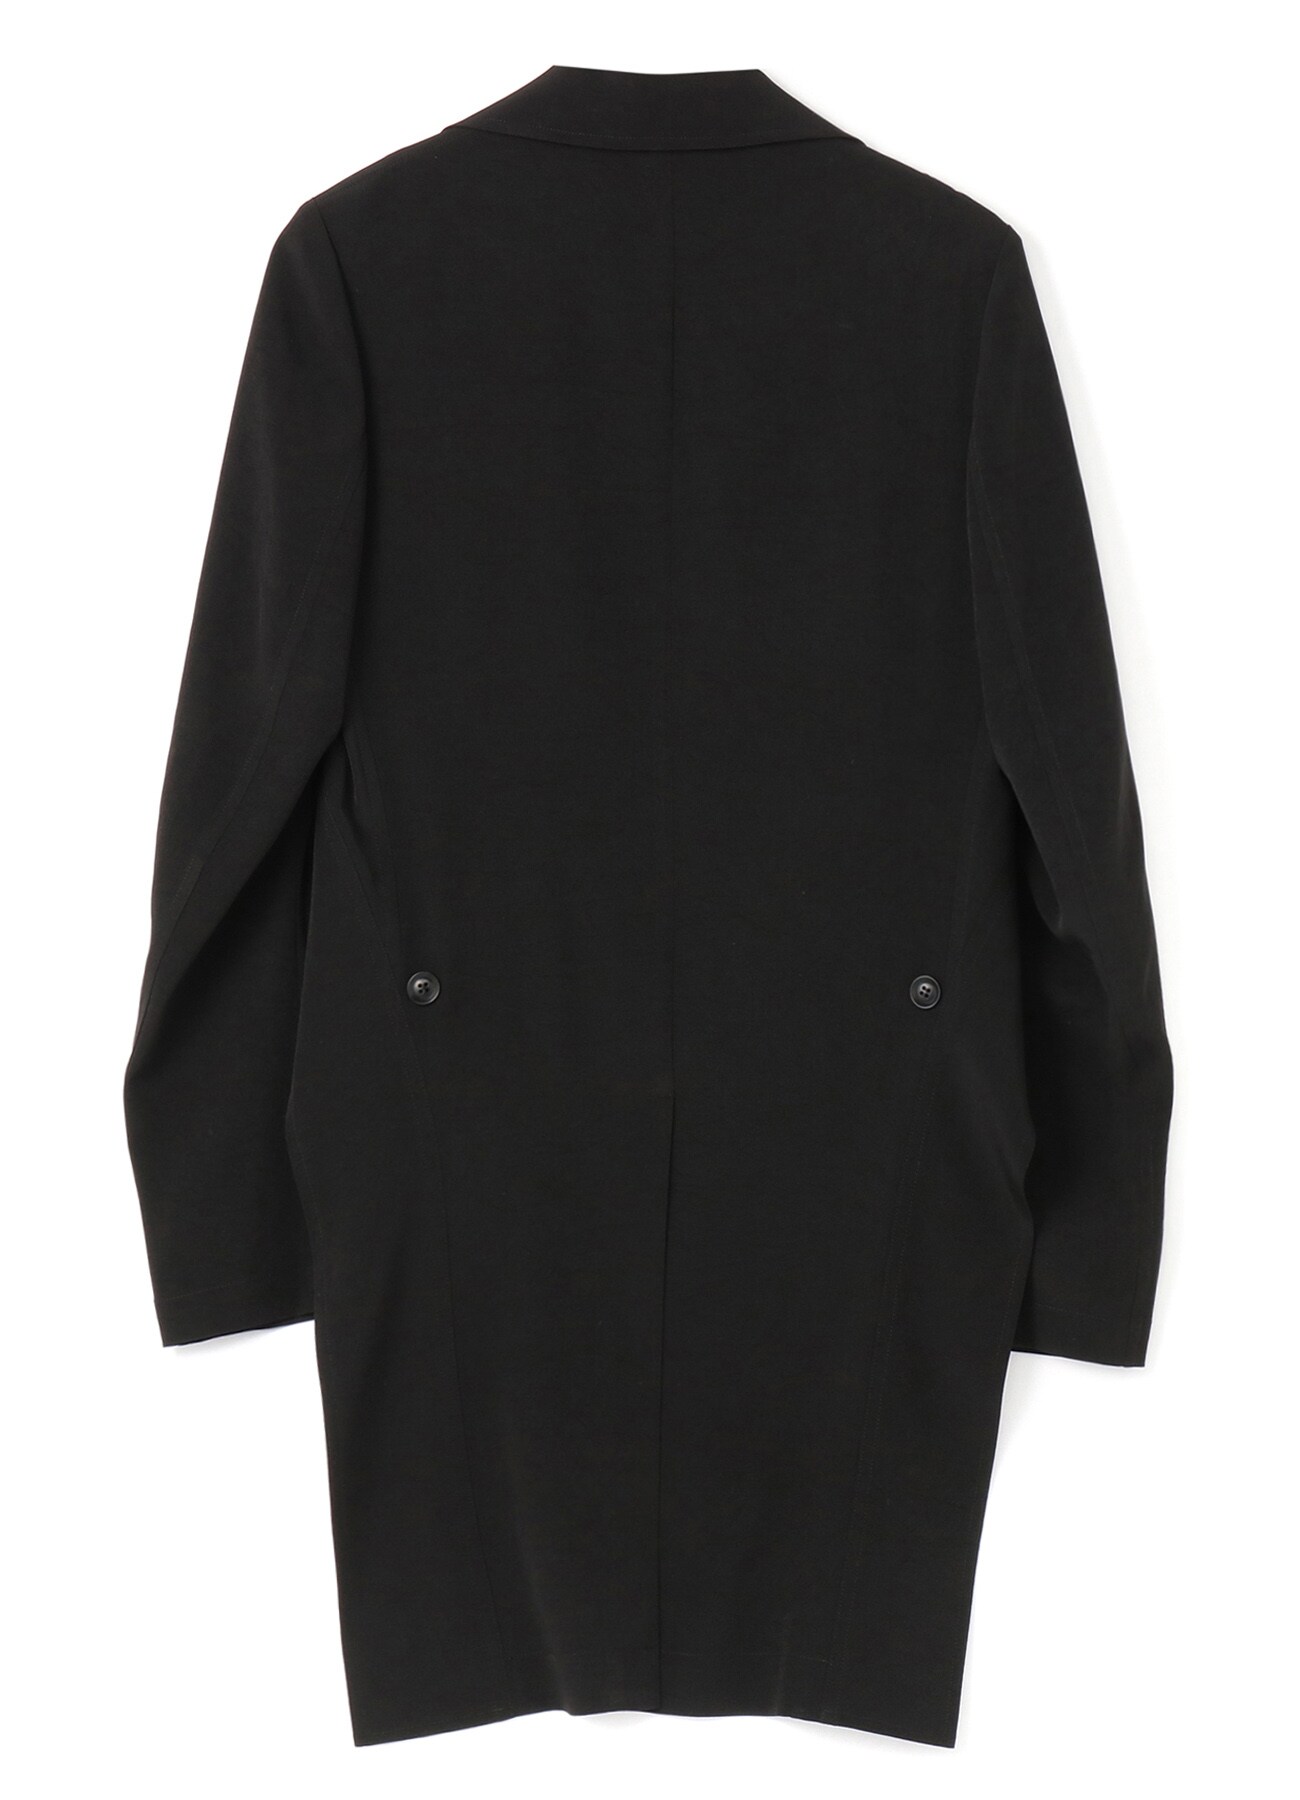 TRIACETATE POLYESTER de CHINE TAILCOAT JACKET